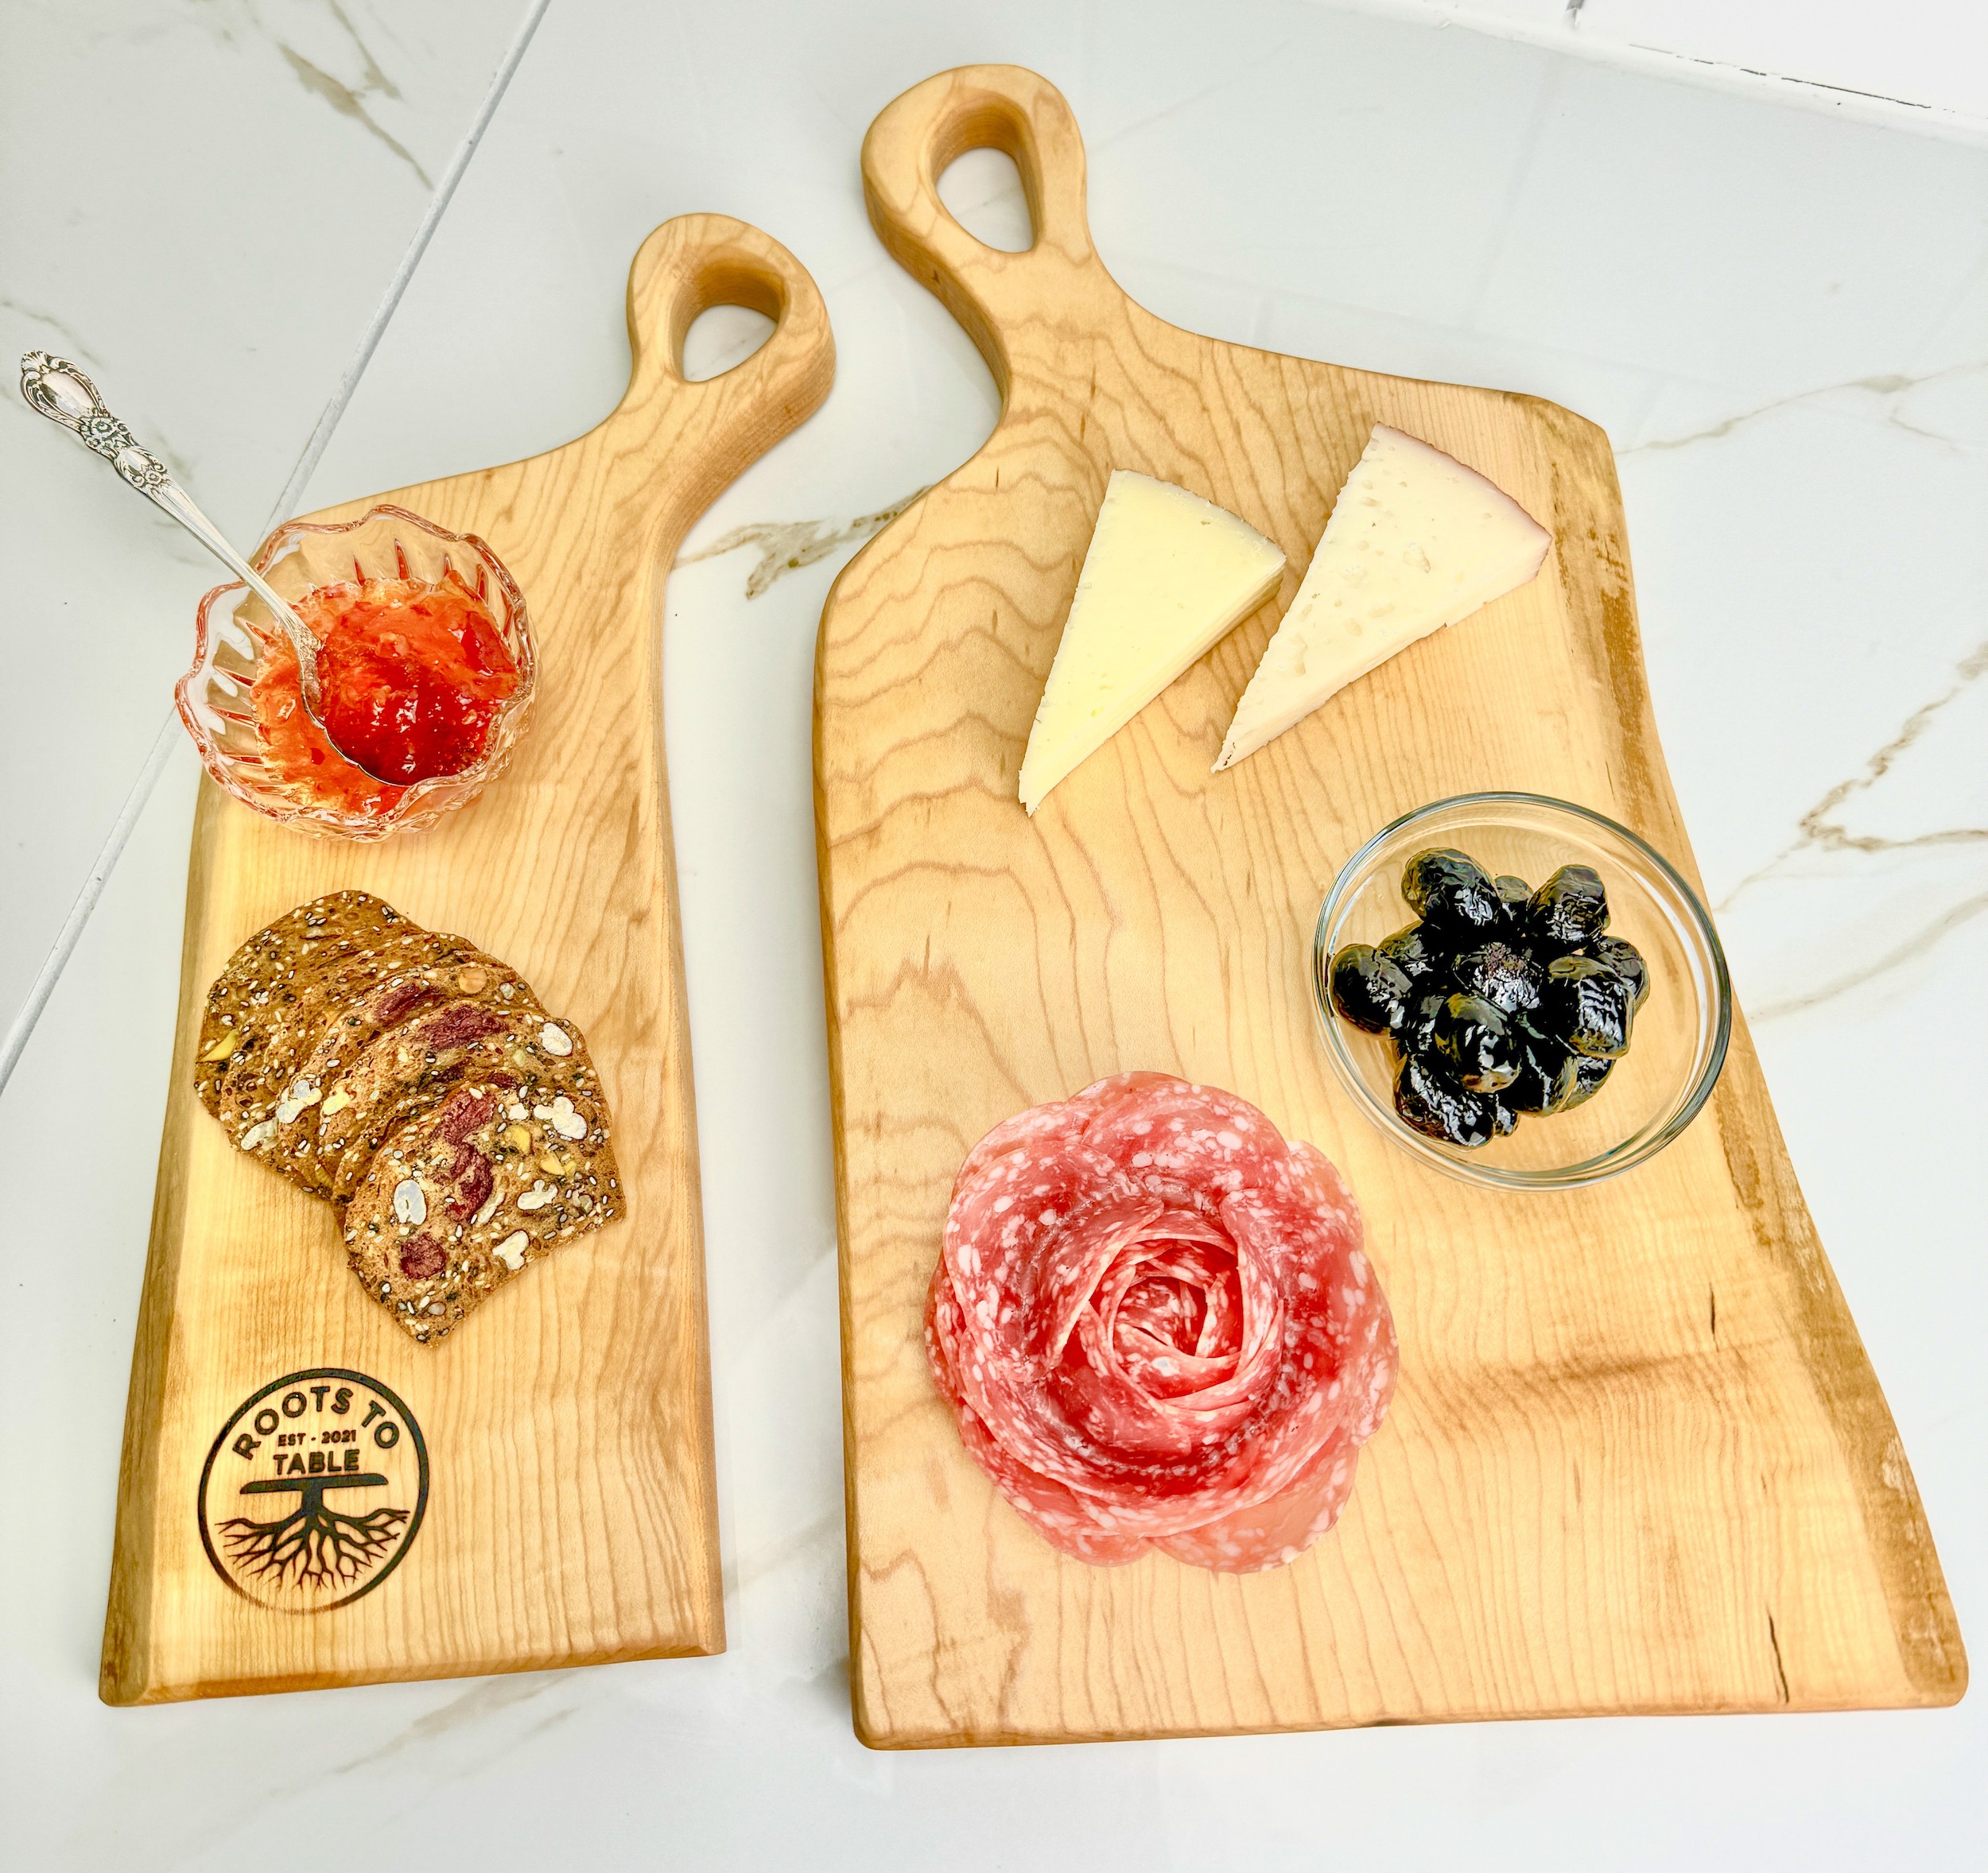 The nestling timbers charcuterie board with an assortment of foods on it